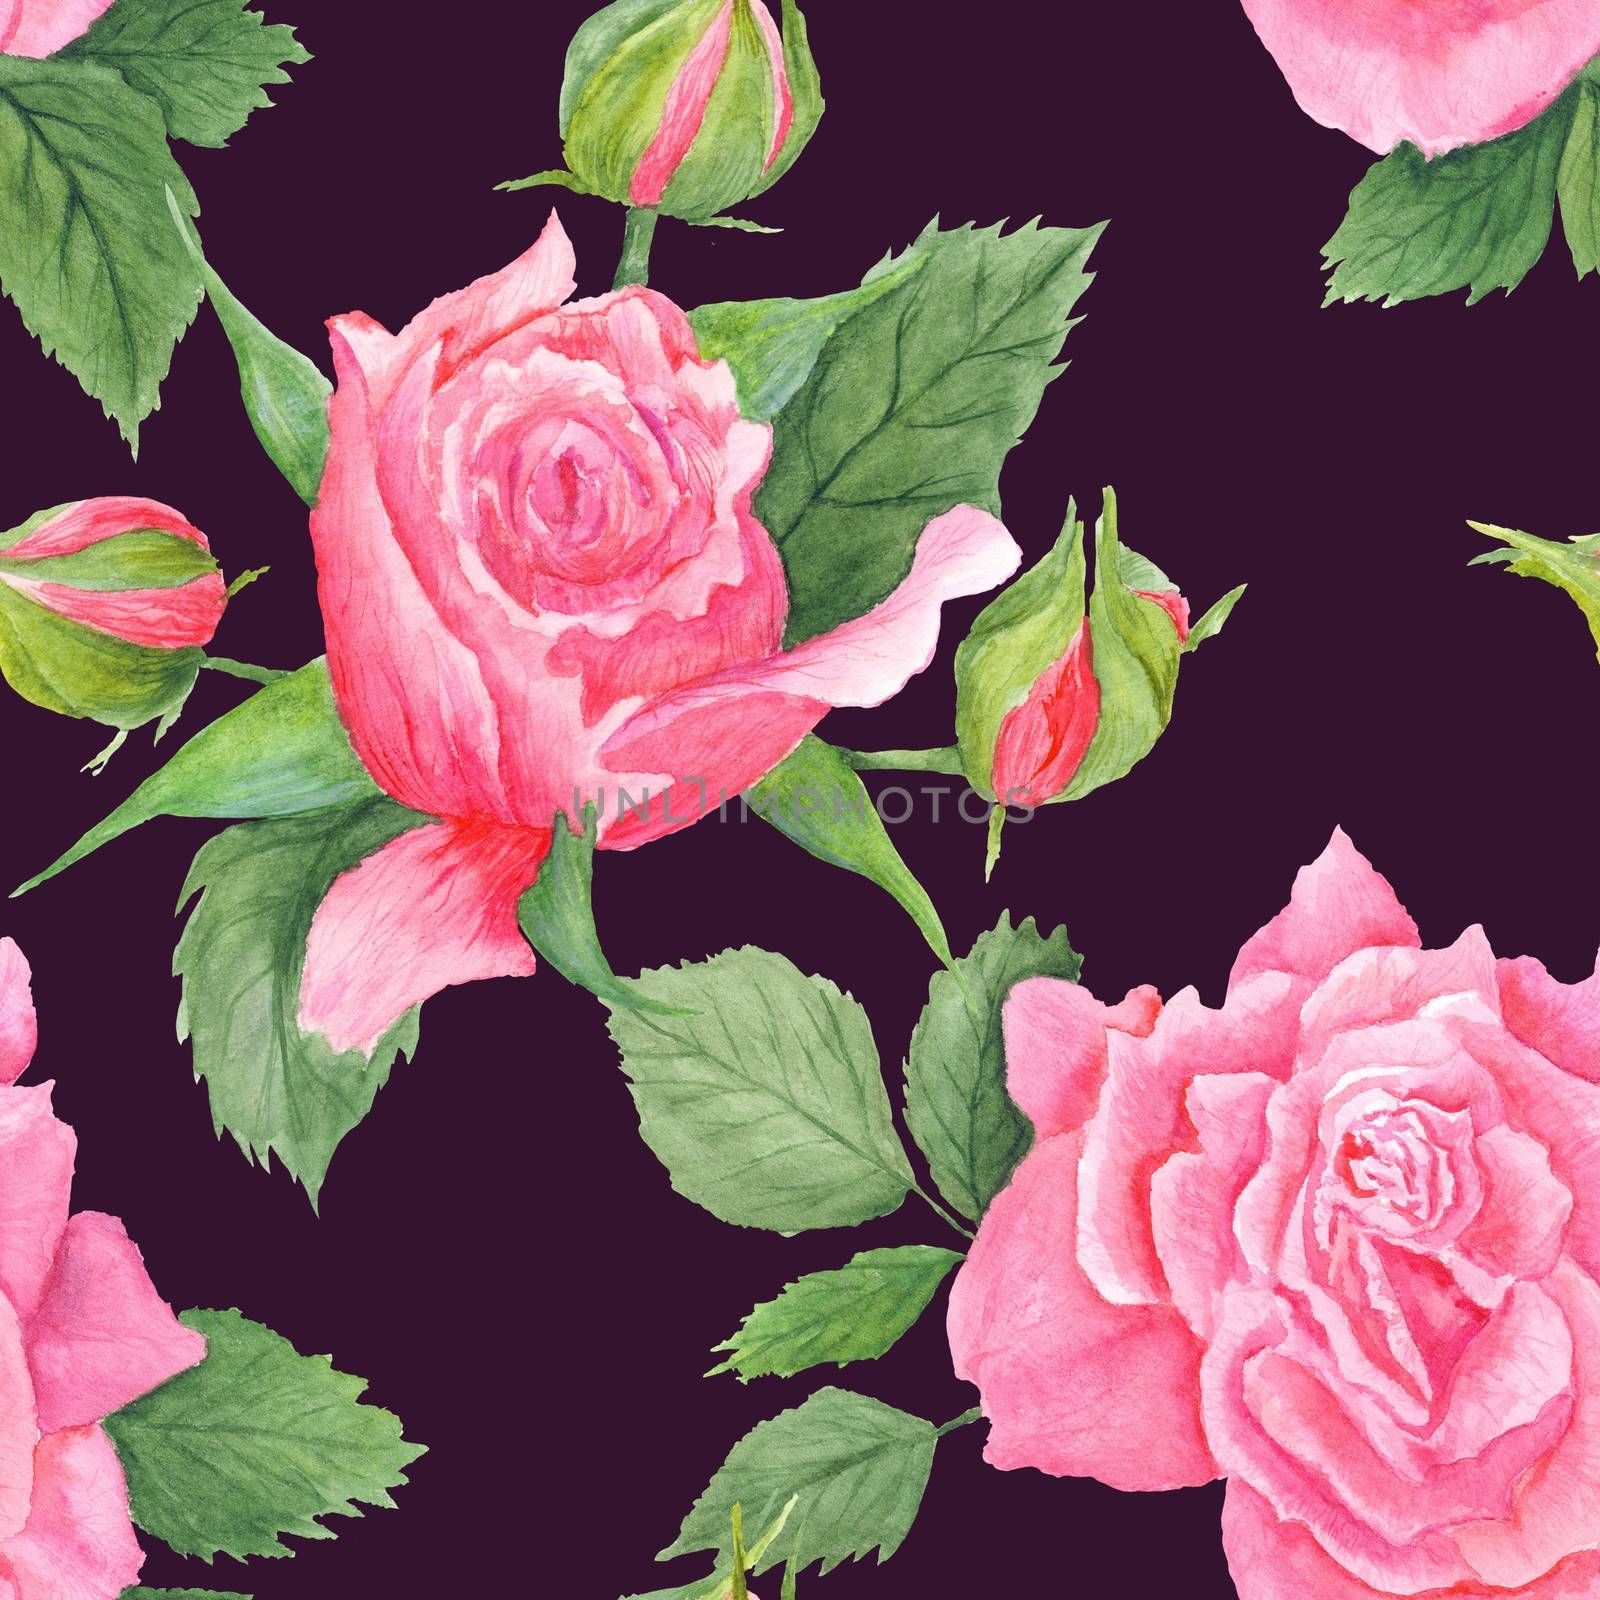 Seamless hand-painted romantic floral illustration with pink roses and buds on black background